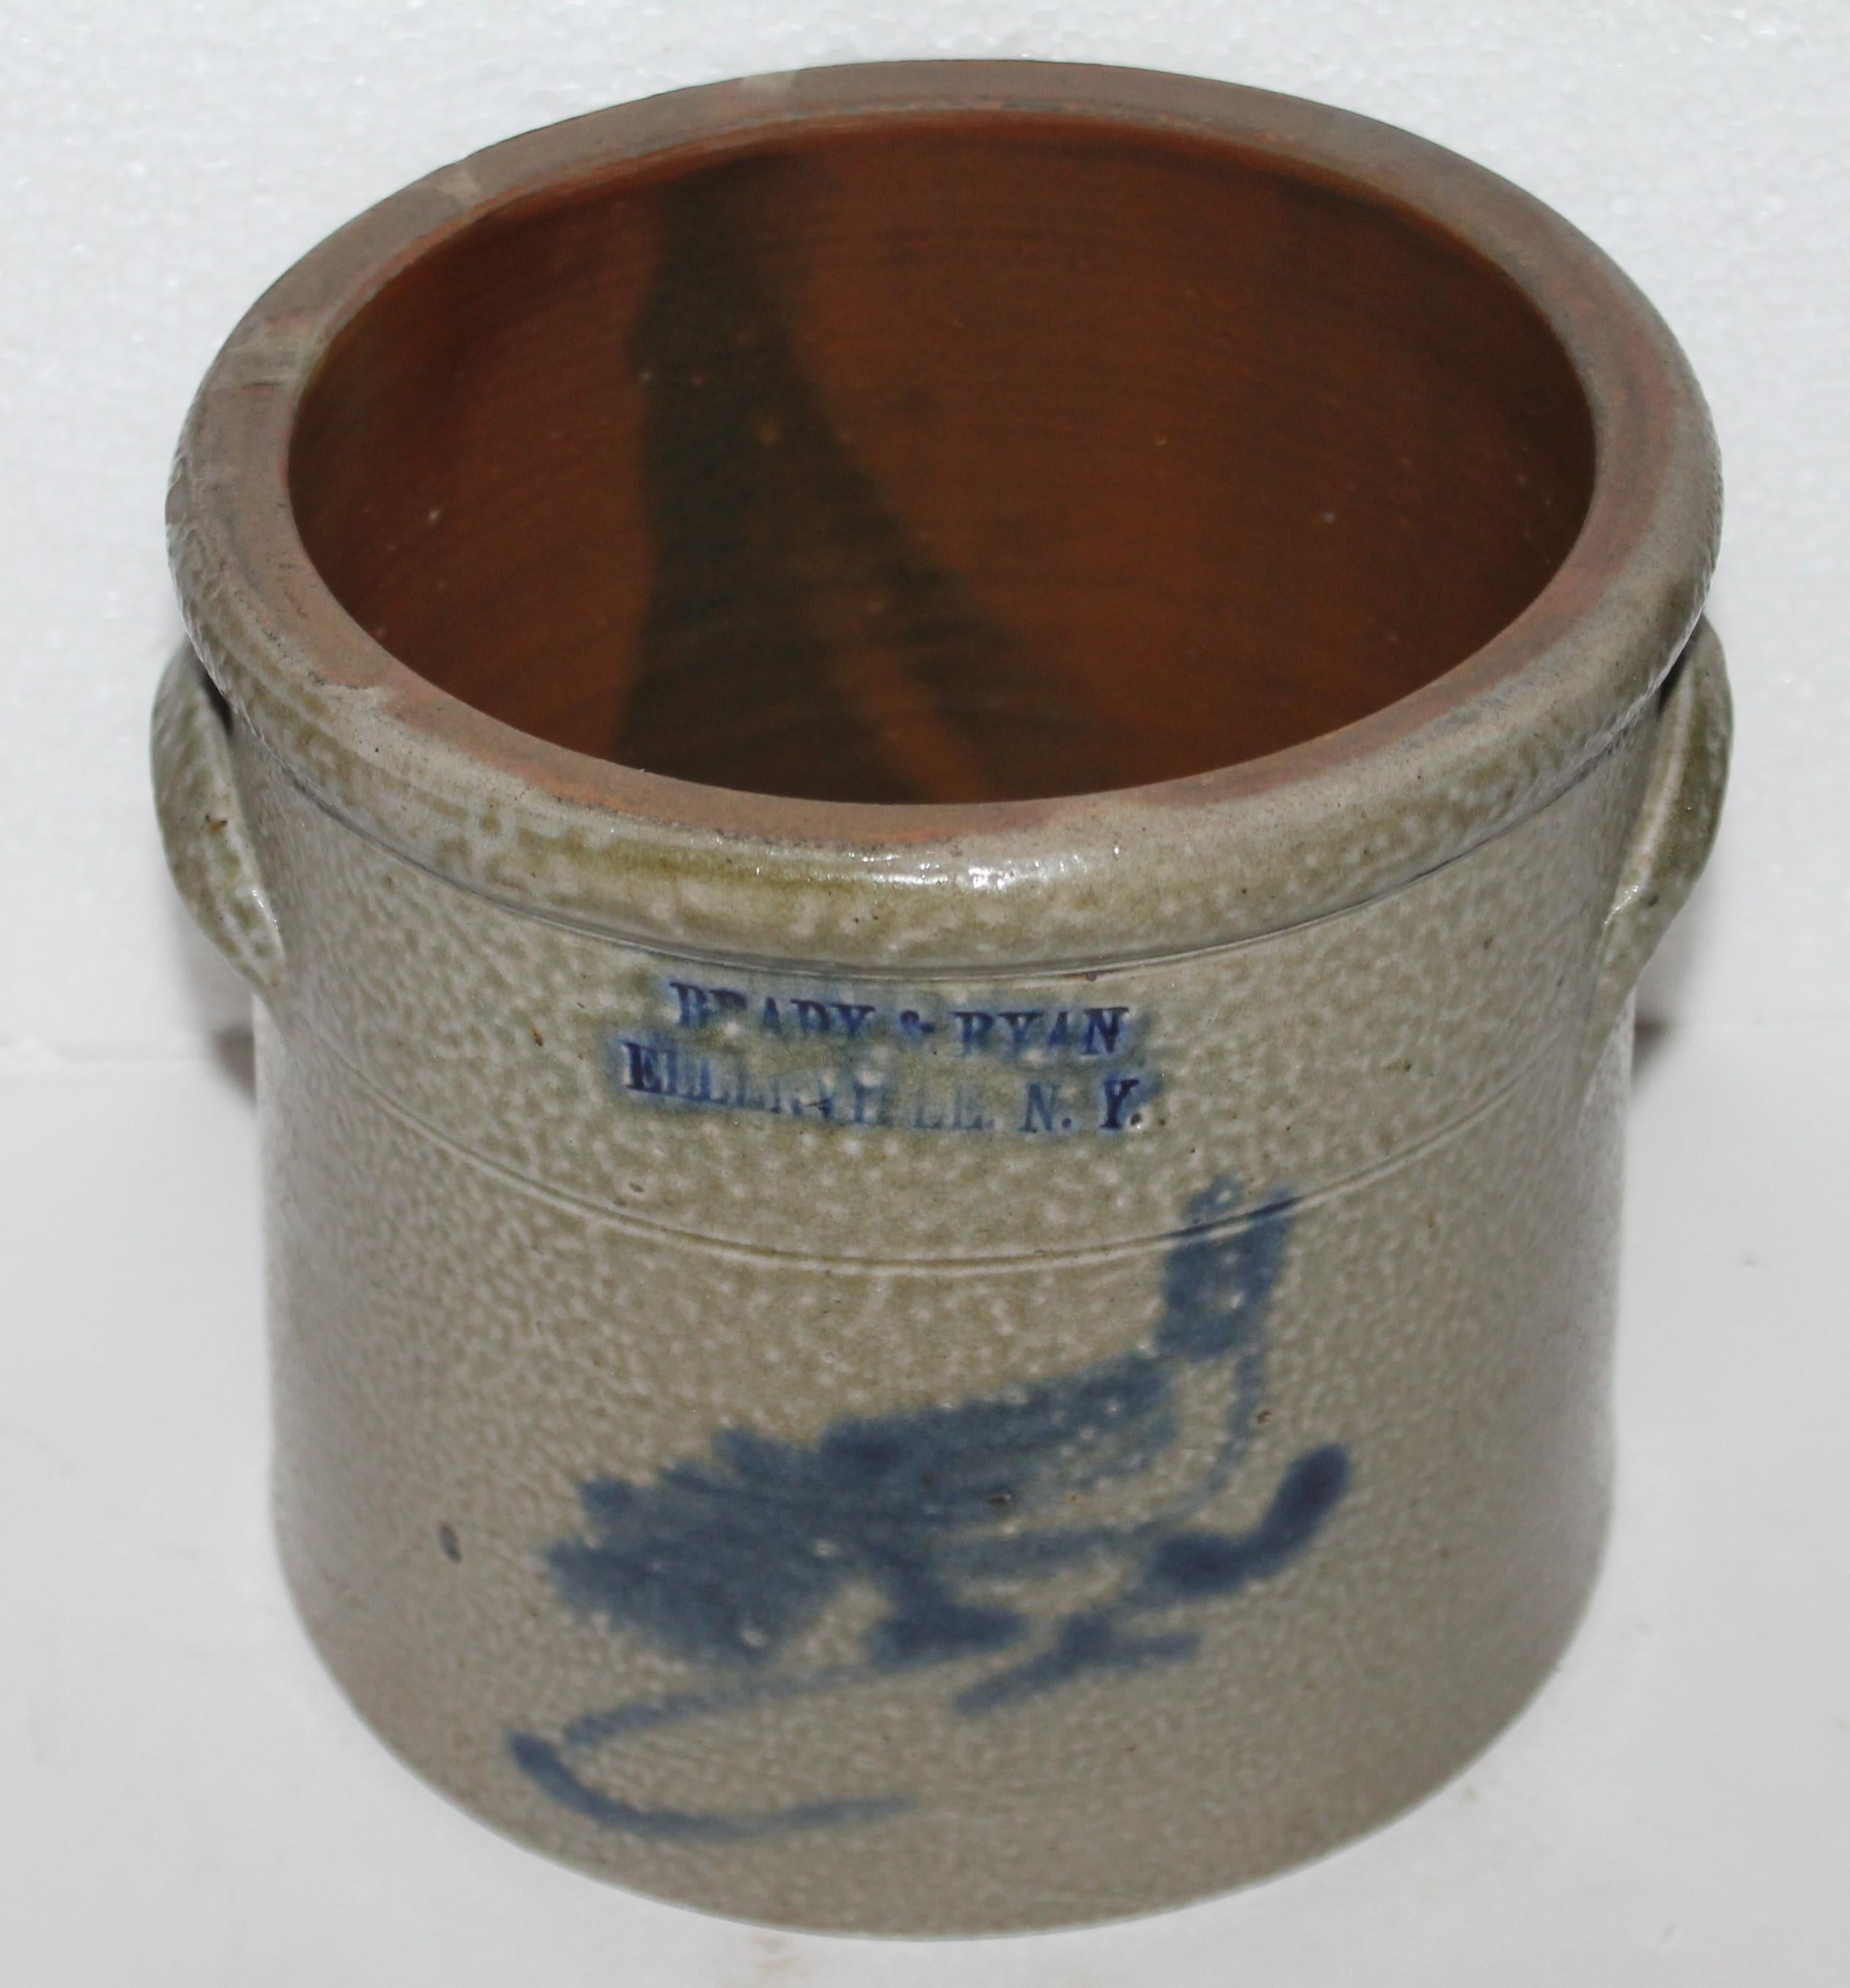 This fine double handled stoneware crock with a bird decoration on the front of the crock is in fine condition. The maker is Brady & Ryan from Ellenville, New York. This fine small beauty is in pristine condition.